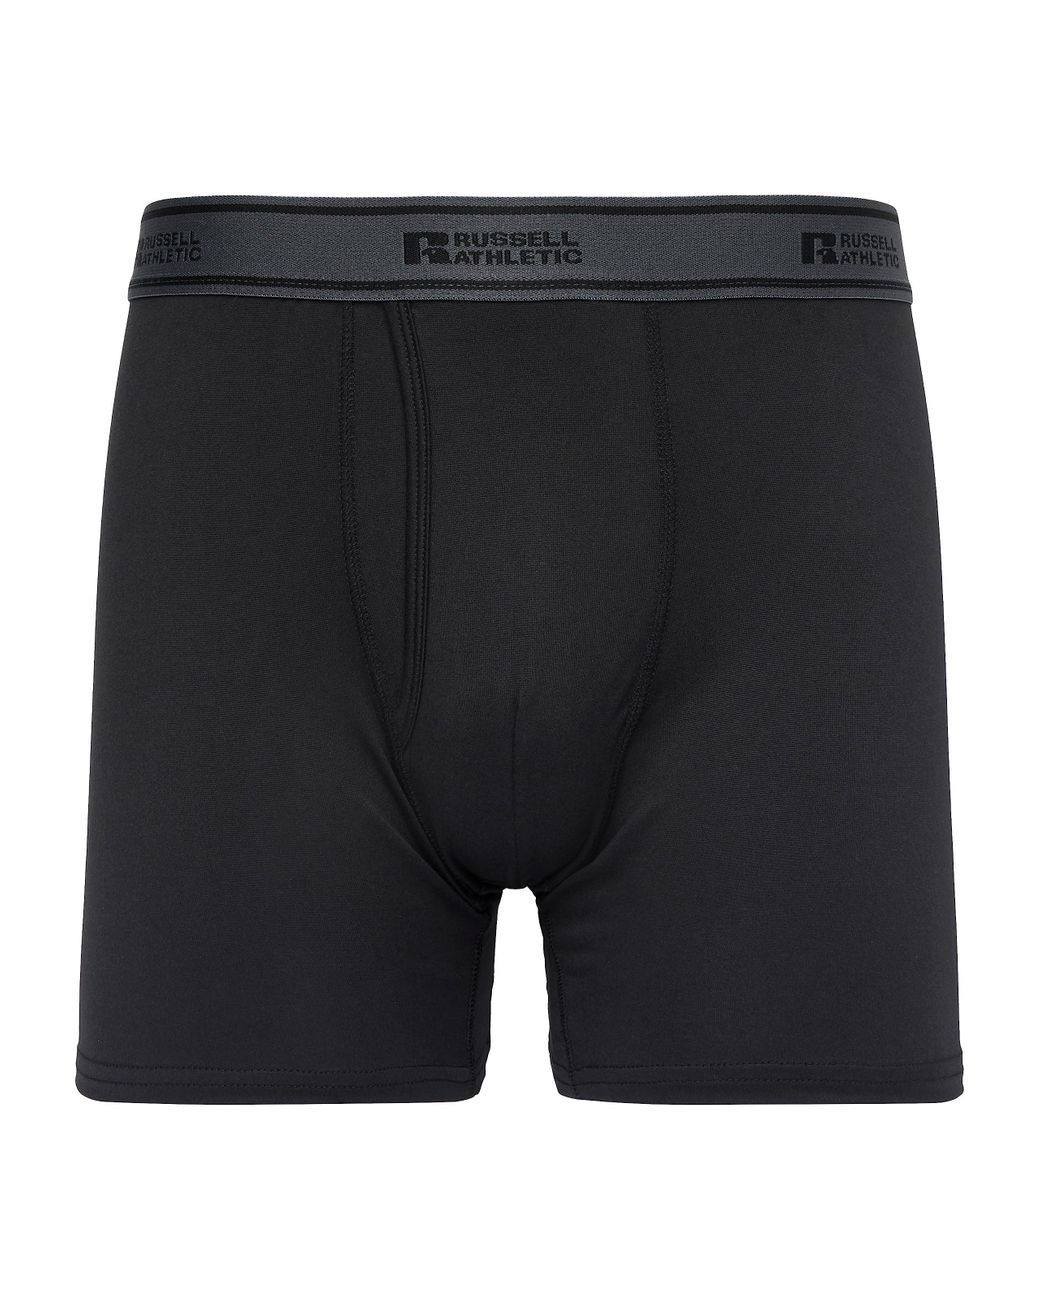 Buy Black 4 pack Boxers from Next USA